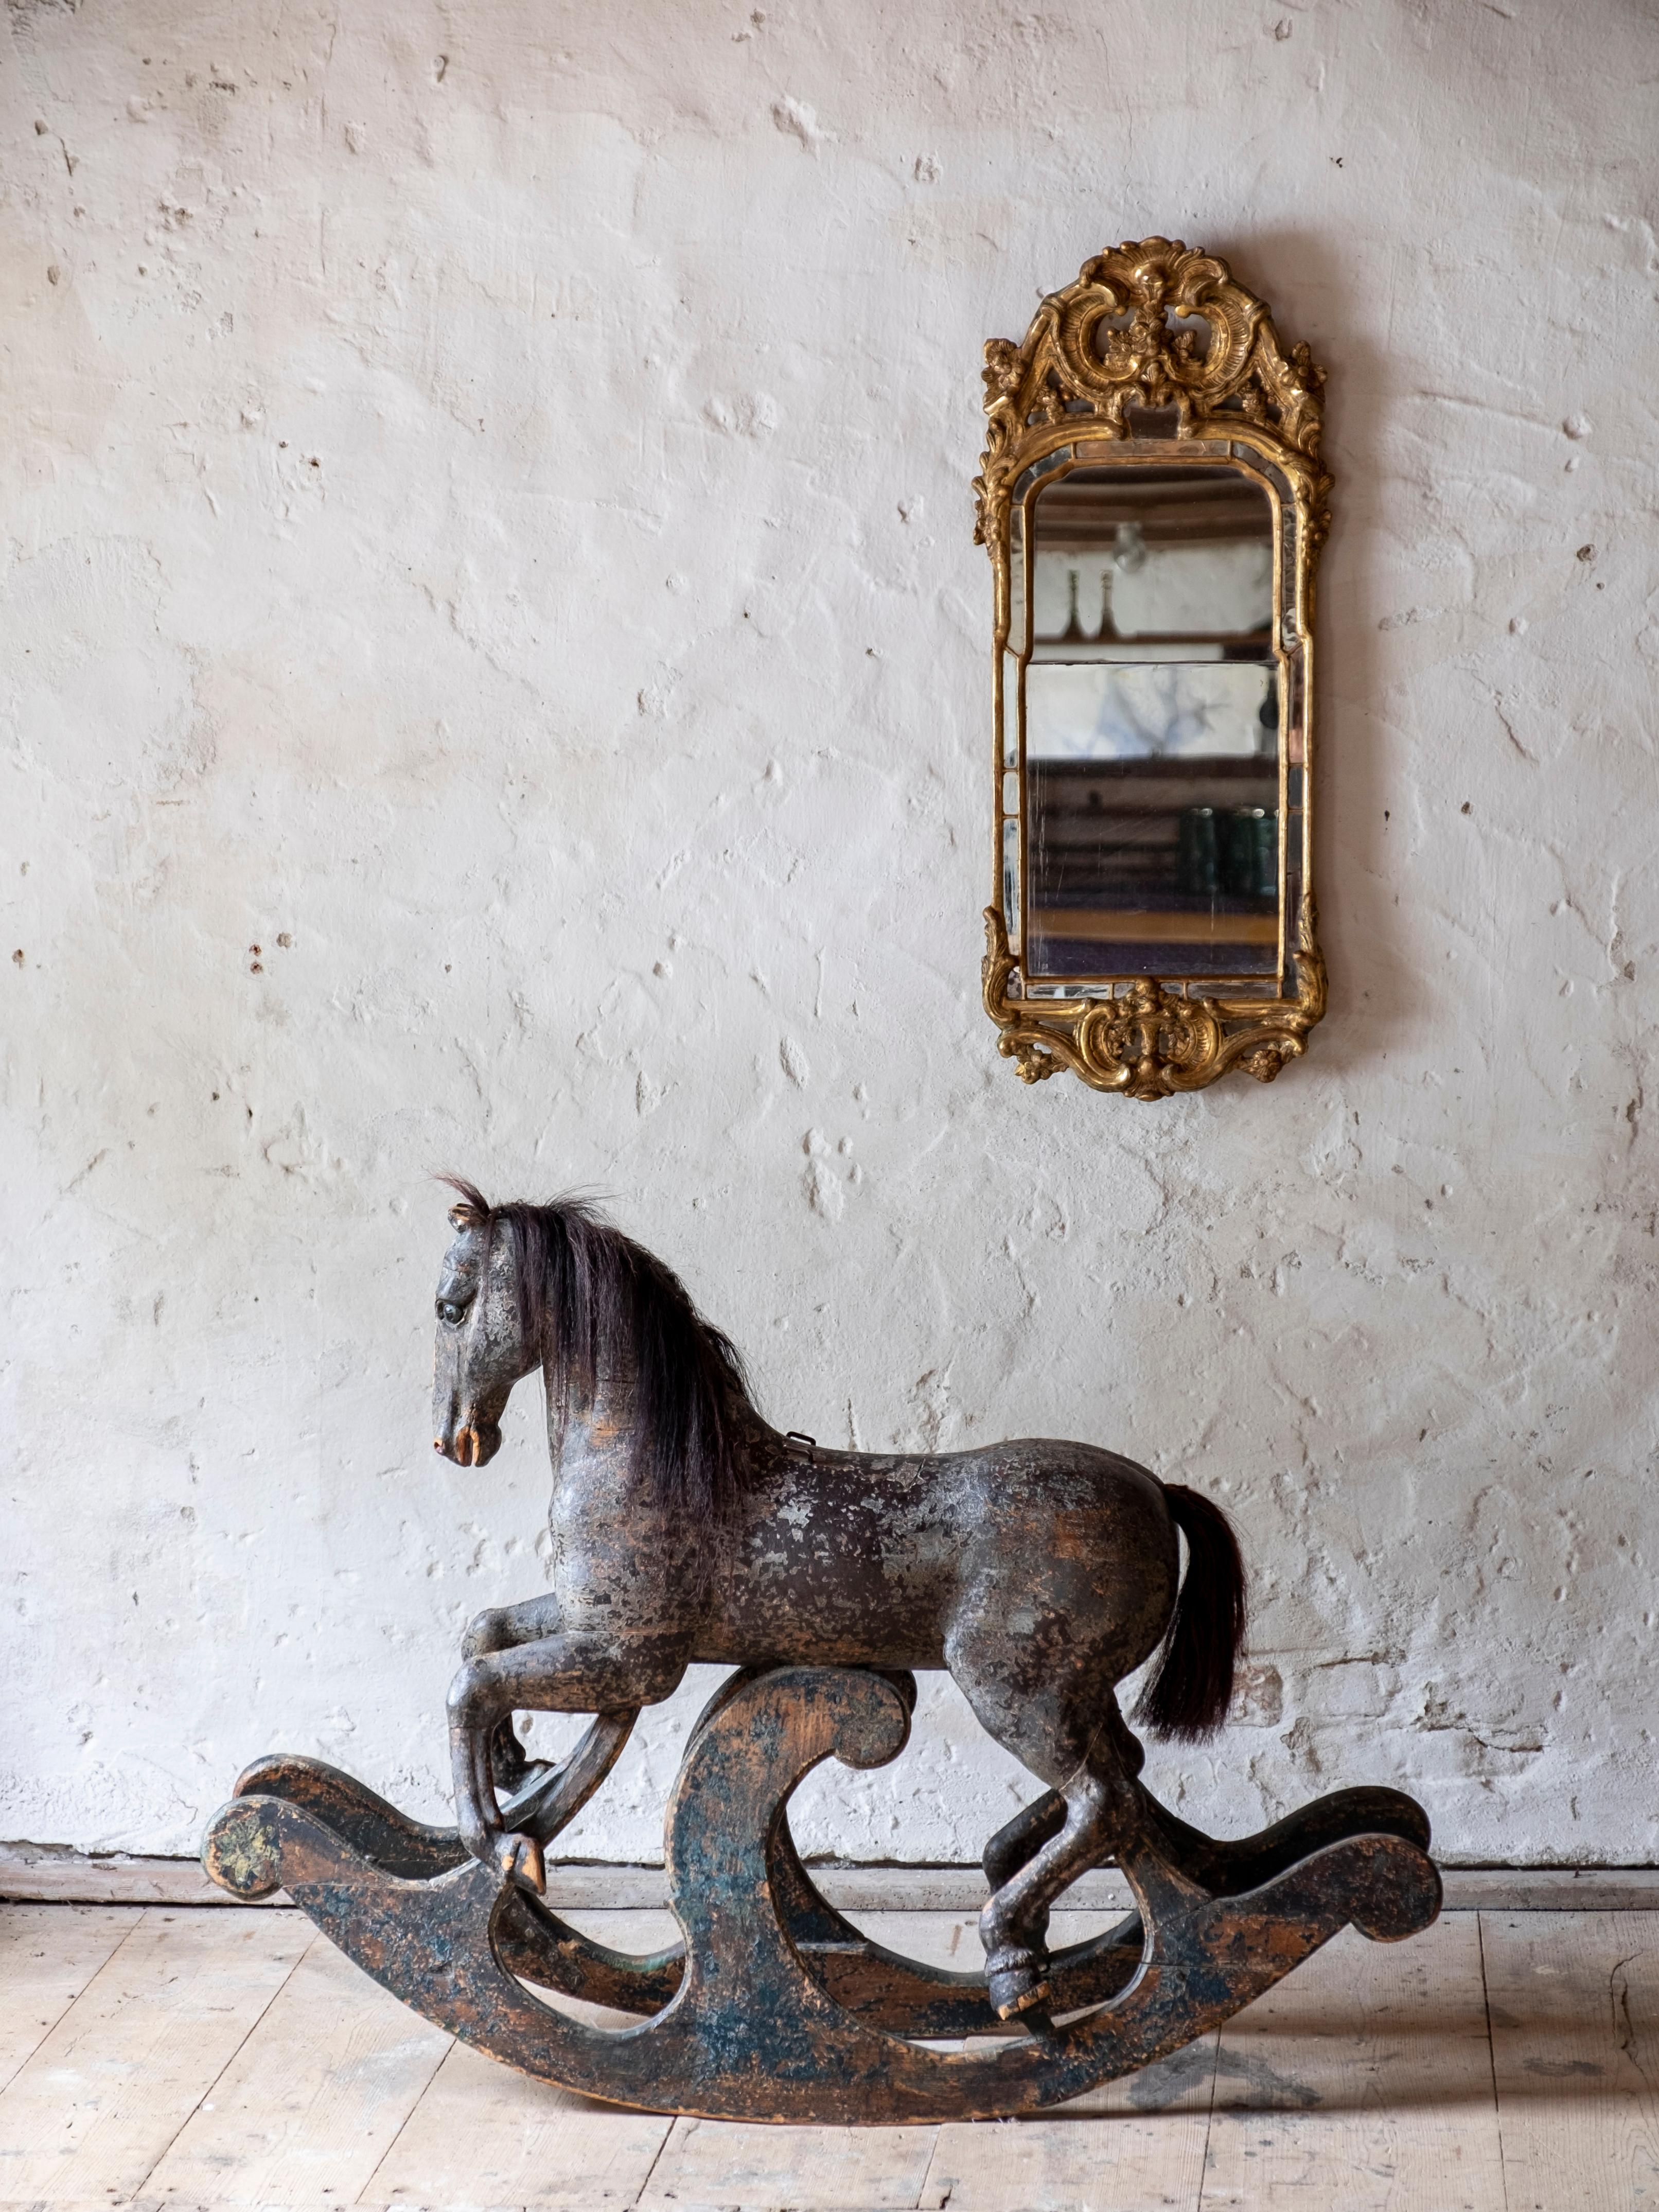 Exceptional 18th century Swedish wooden rocking horse in original color with great proportions and detail, circa 1750

The condition is very good. The horse is structurally good and sturdy. Original horsehair on mane and tail. The original paint